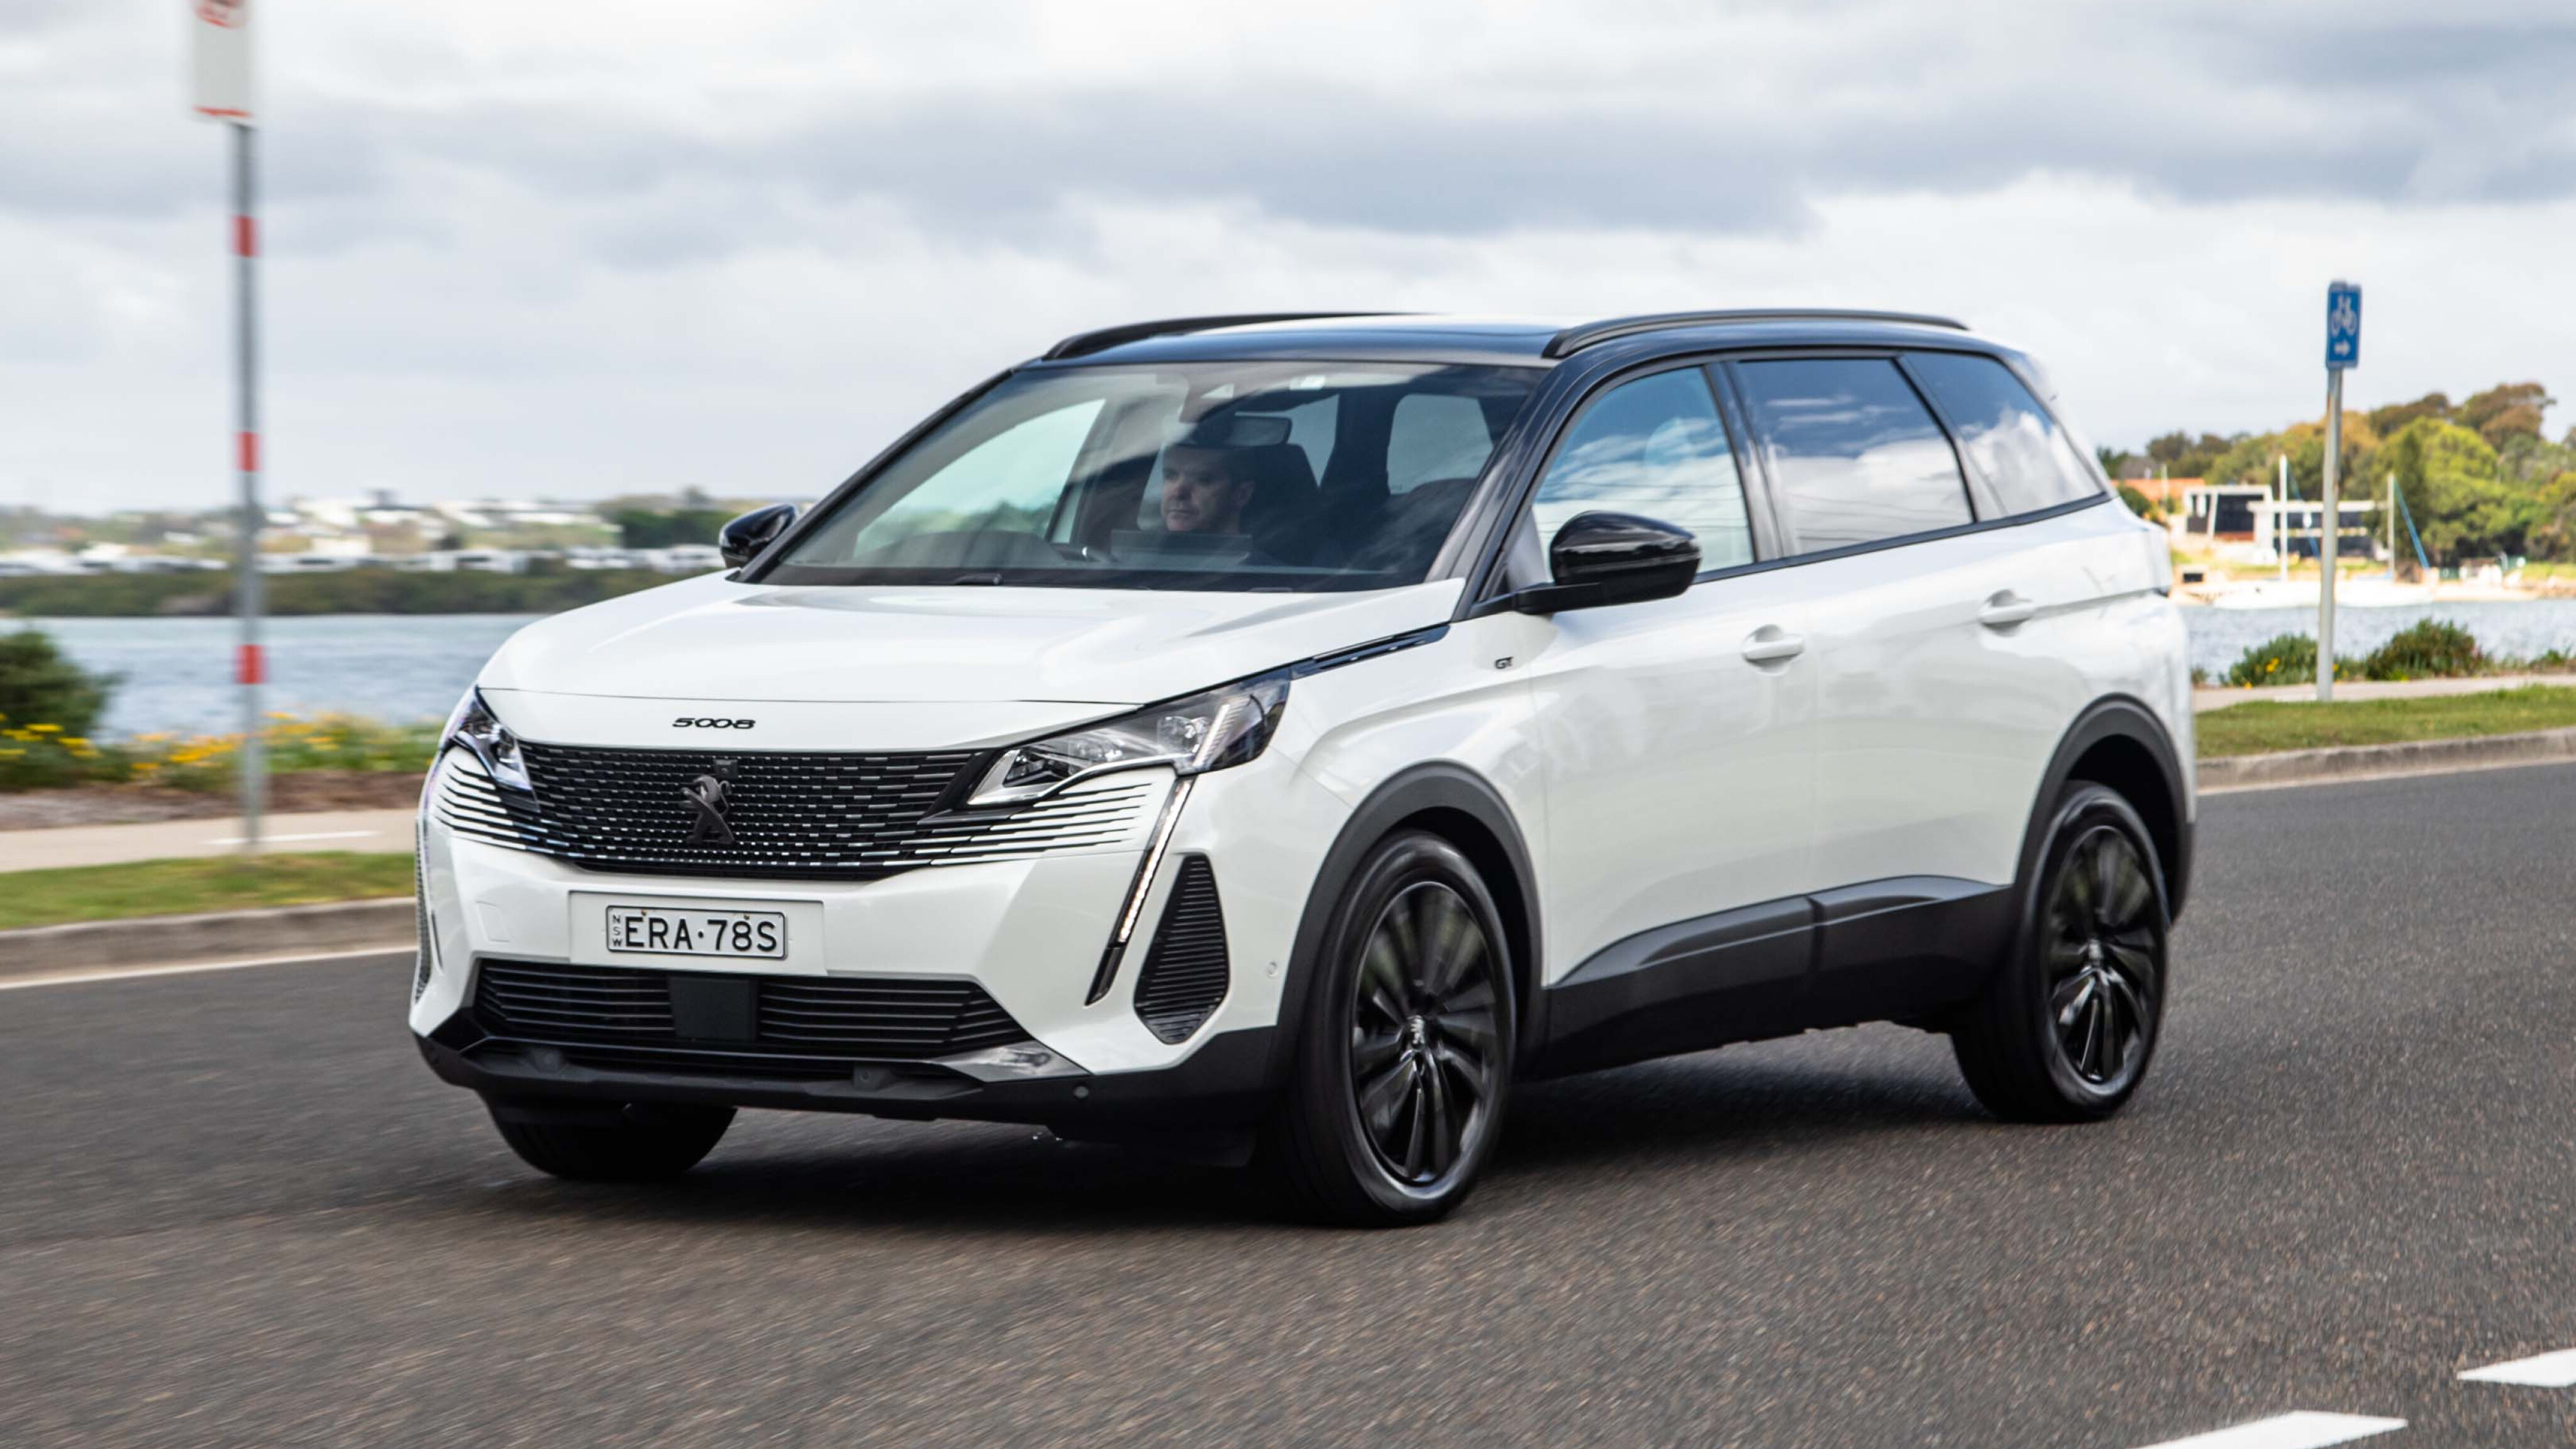 4 things the Peugeot 5008 does that I've not had in another car